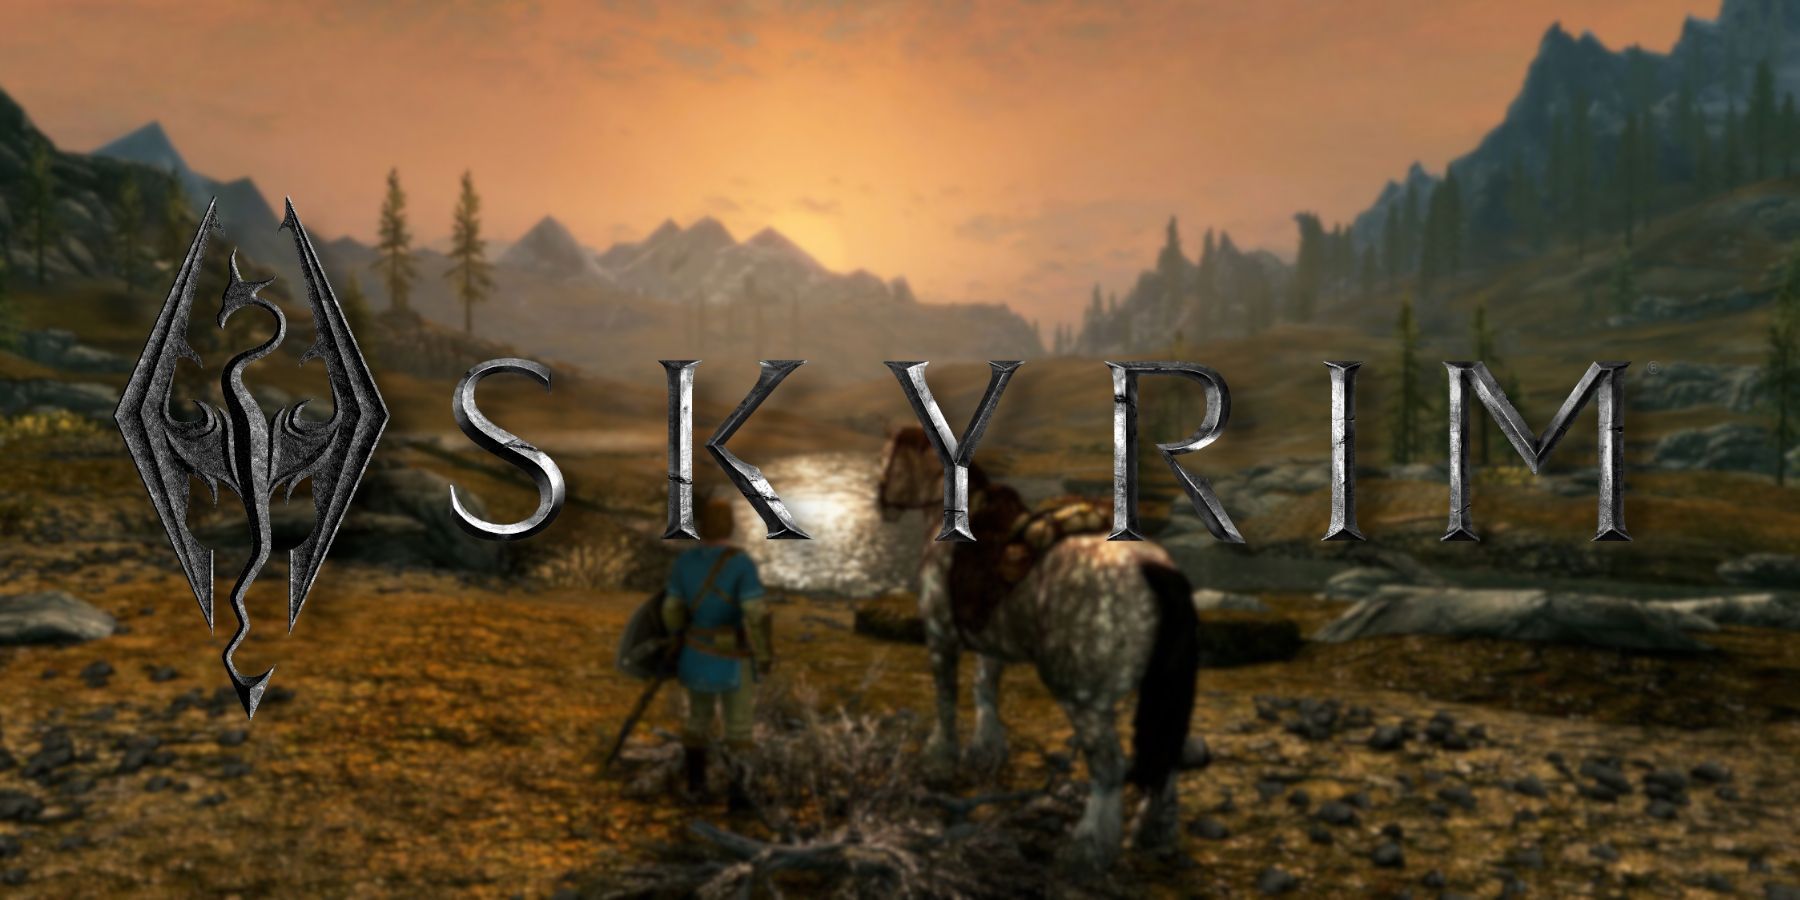 The Skyrim logo with the player and their horse observing a beautiful sunset/sunrise.